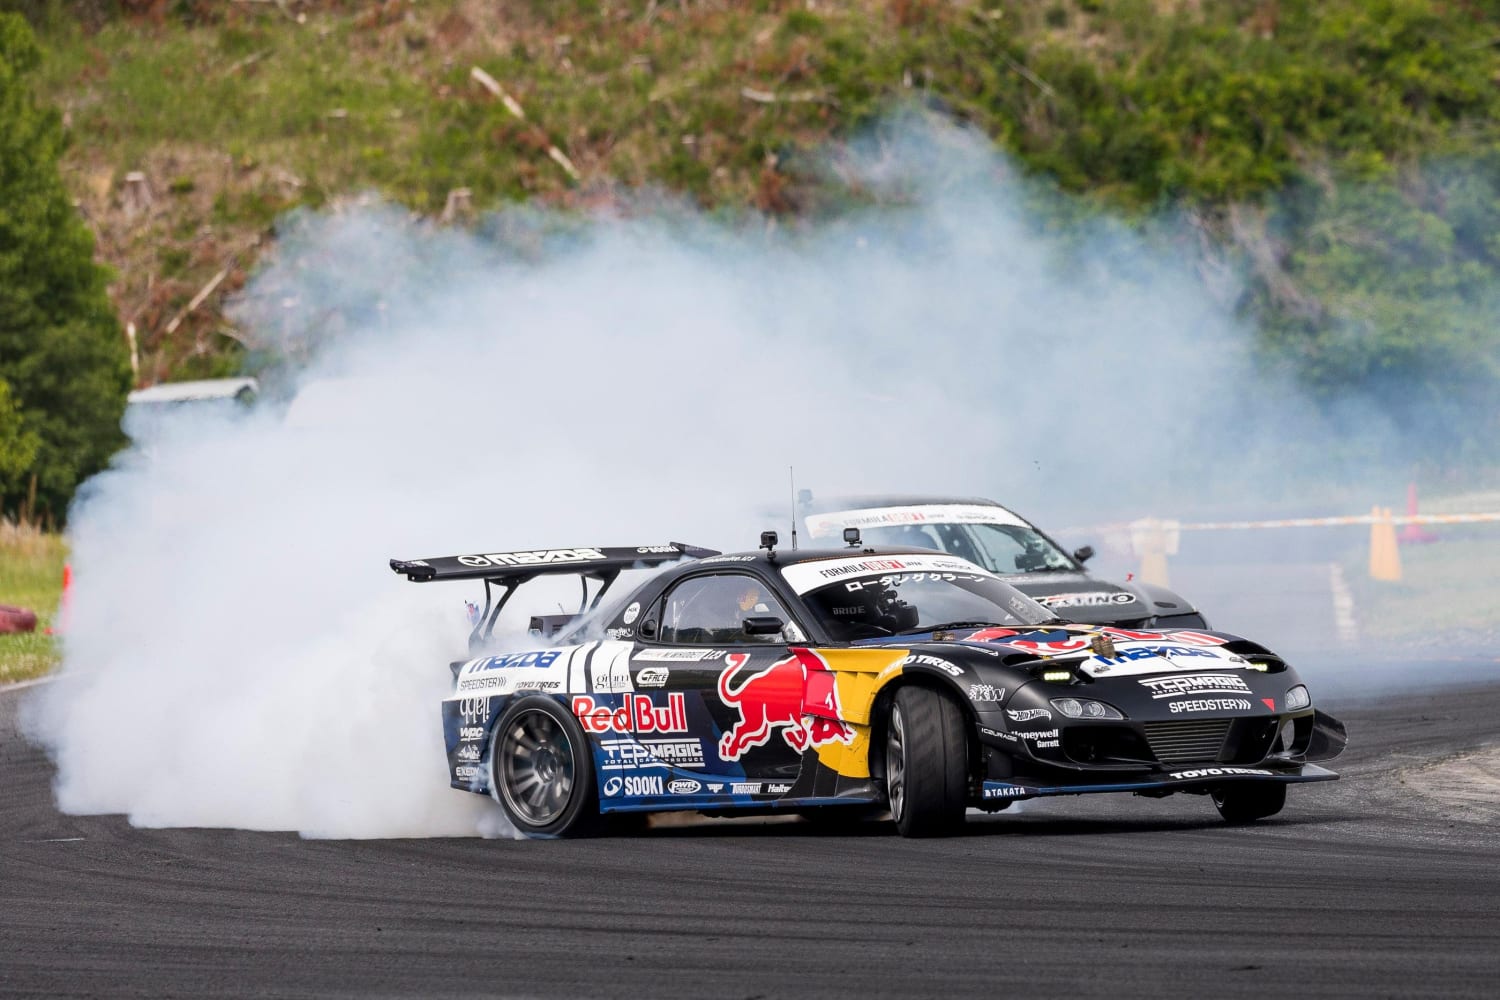 The Most Well-Known Drift Cars